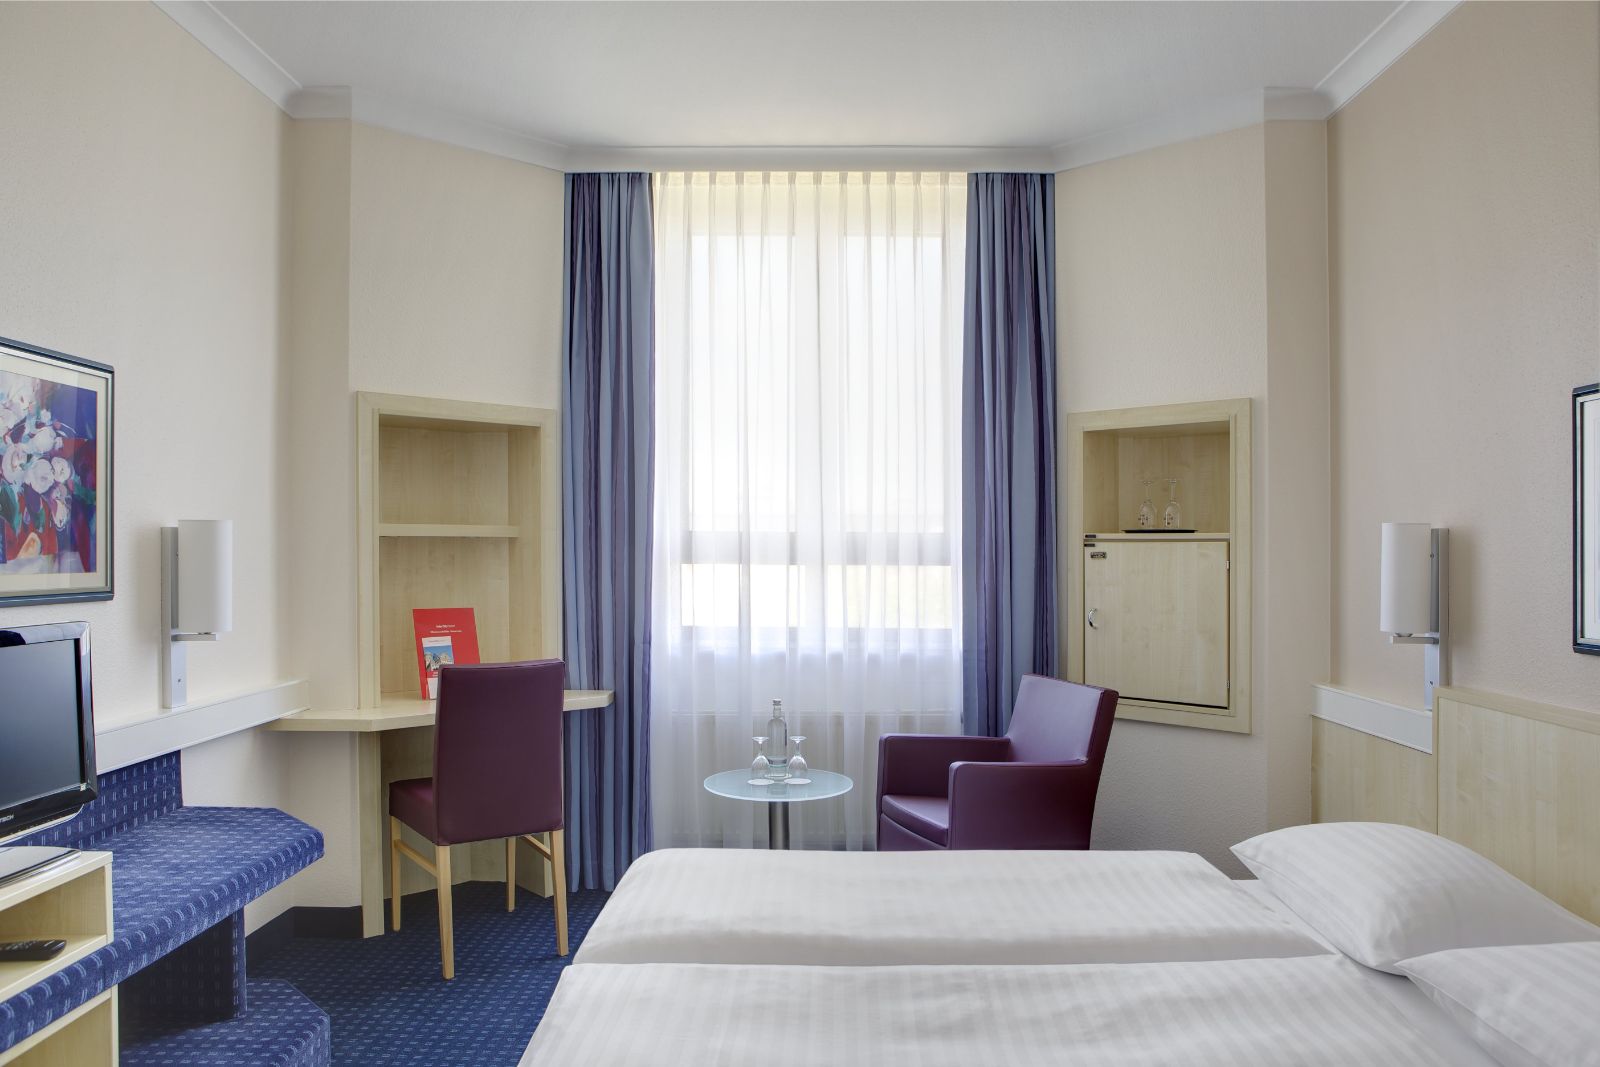 IntercityHotel Augsburg <br/>87.00 ew <br/> <a href='http://vakantieoplossing.nl/outpage/?id=1c3494822f403d837b05eee87786ad18' target='_blank'>View Details</a>